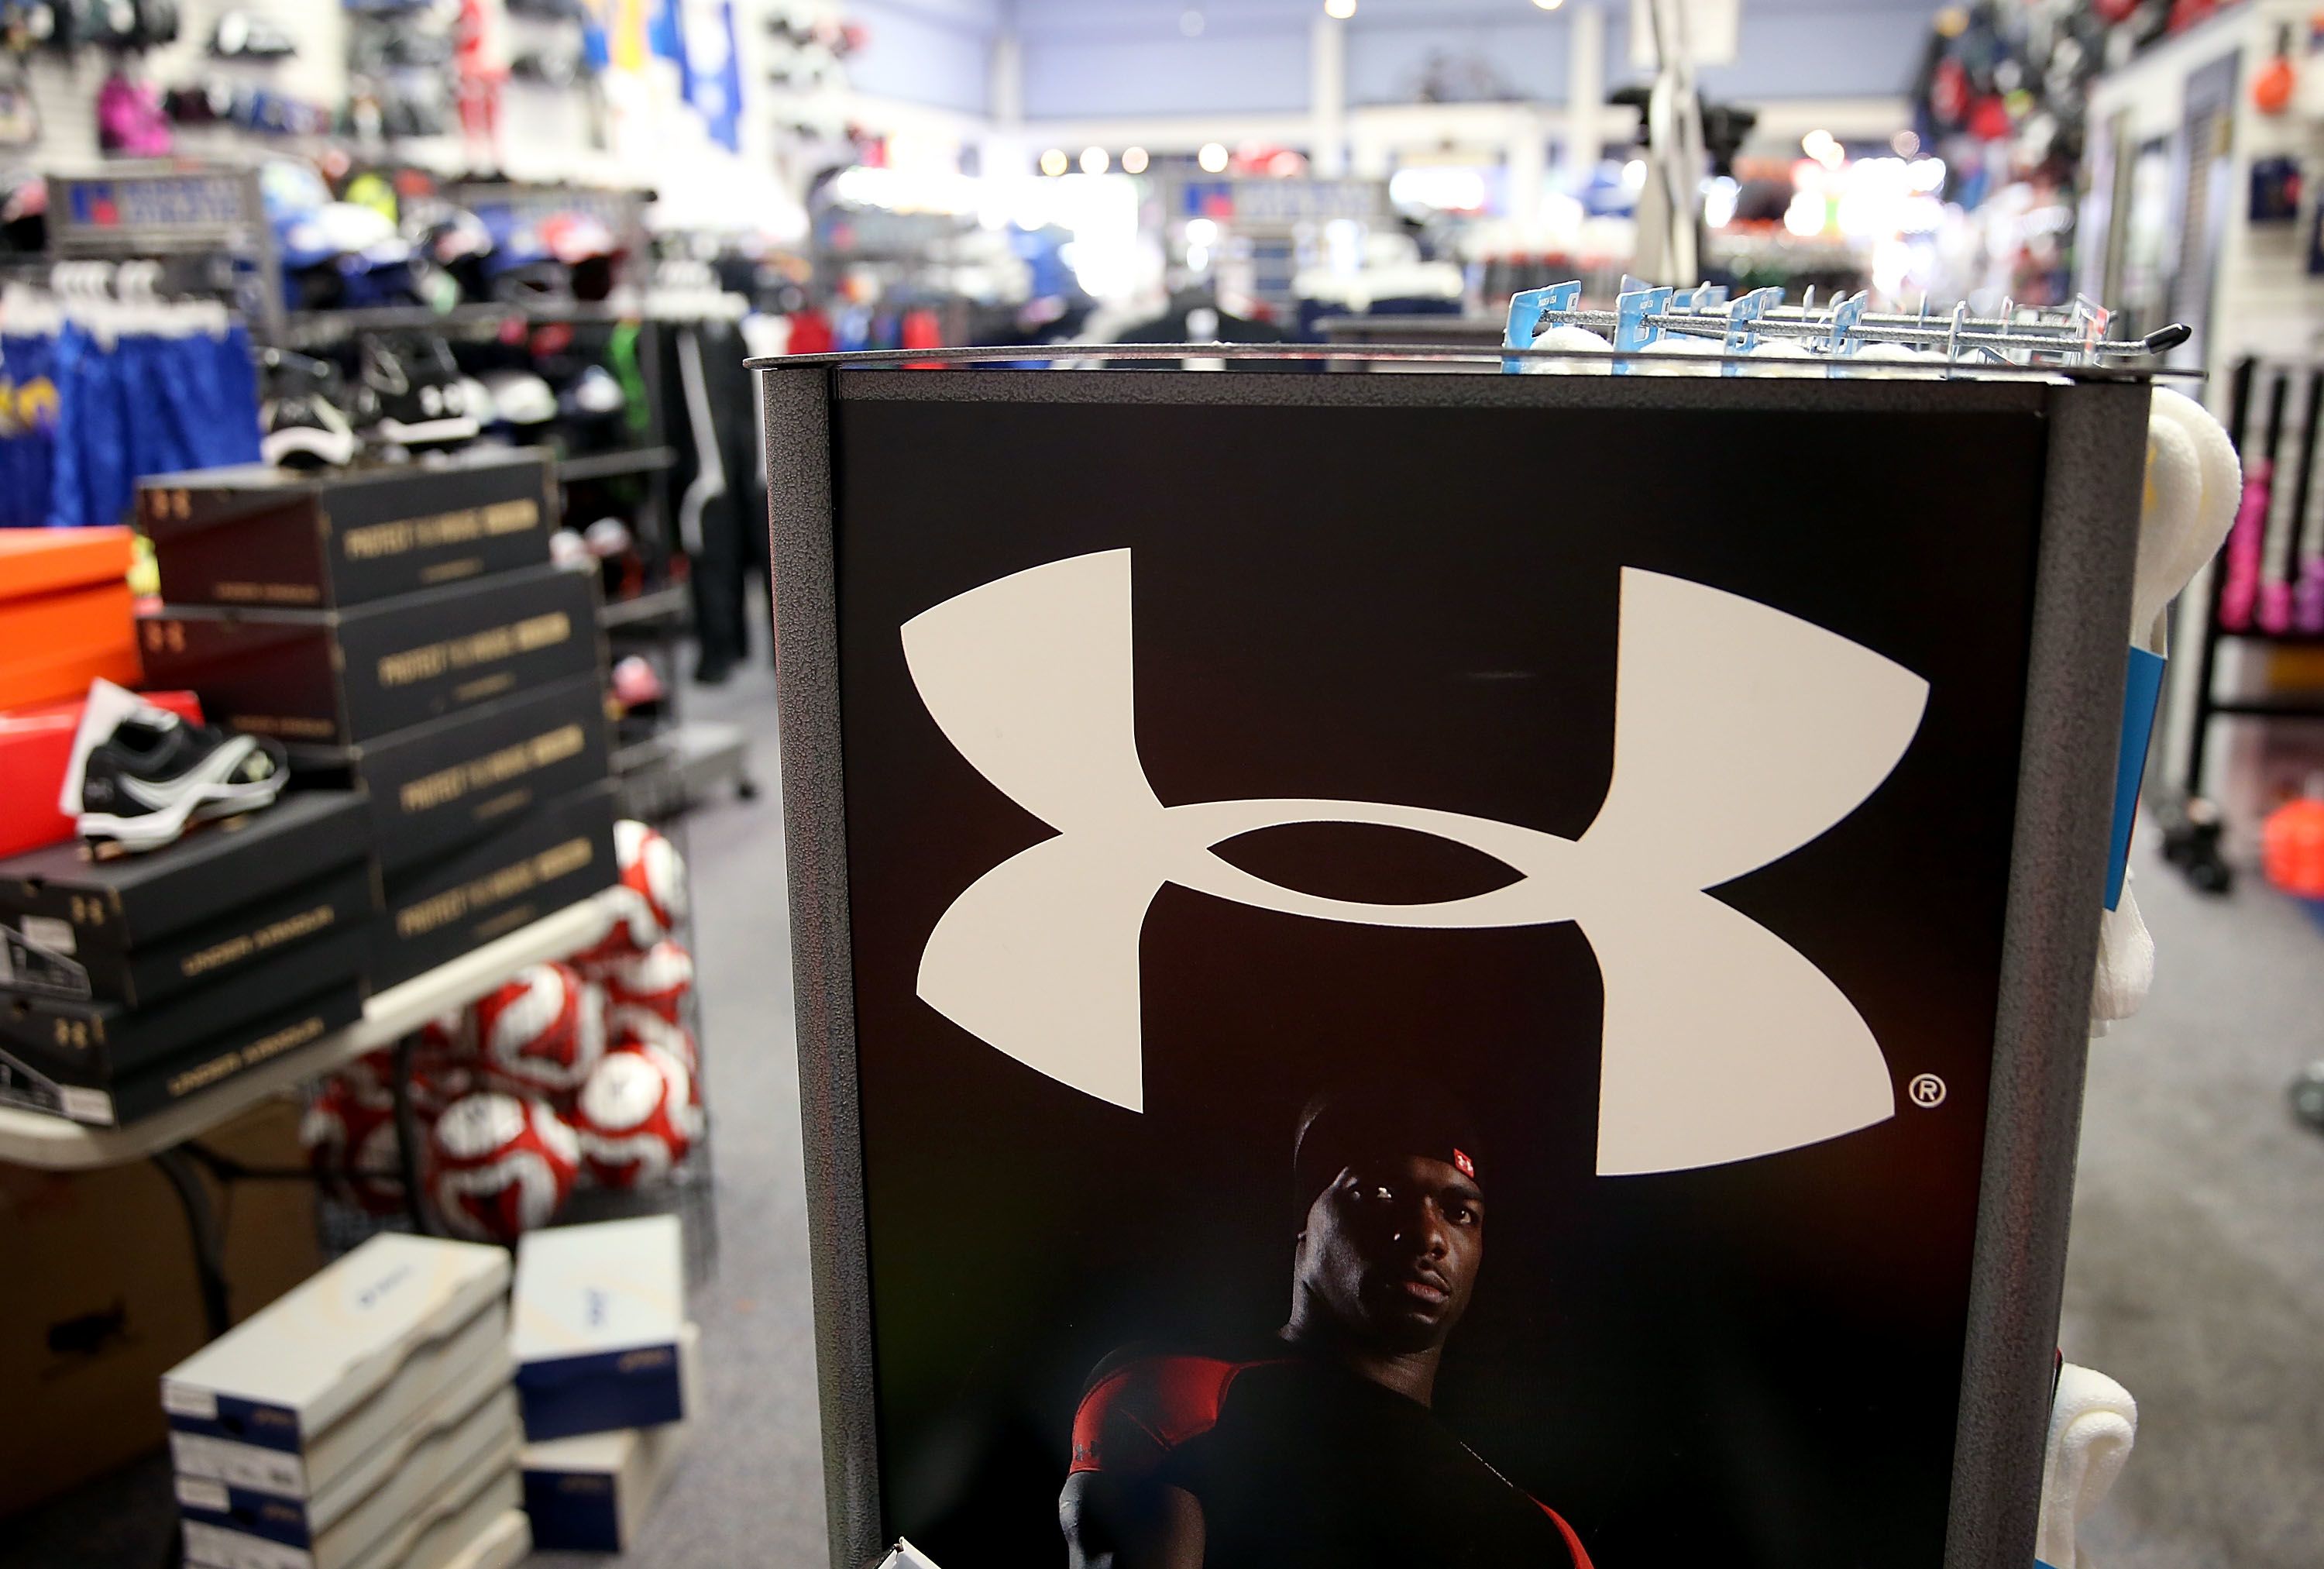 Strategy Study: How Under Armour Is Challenging The Athletic Market